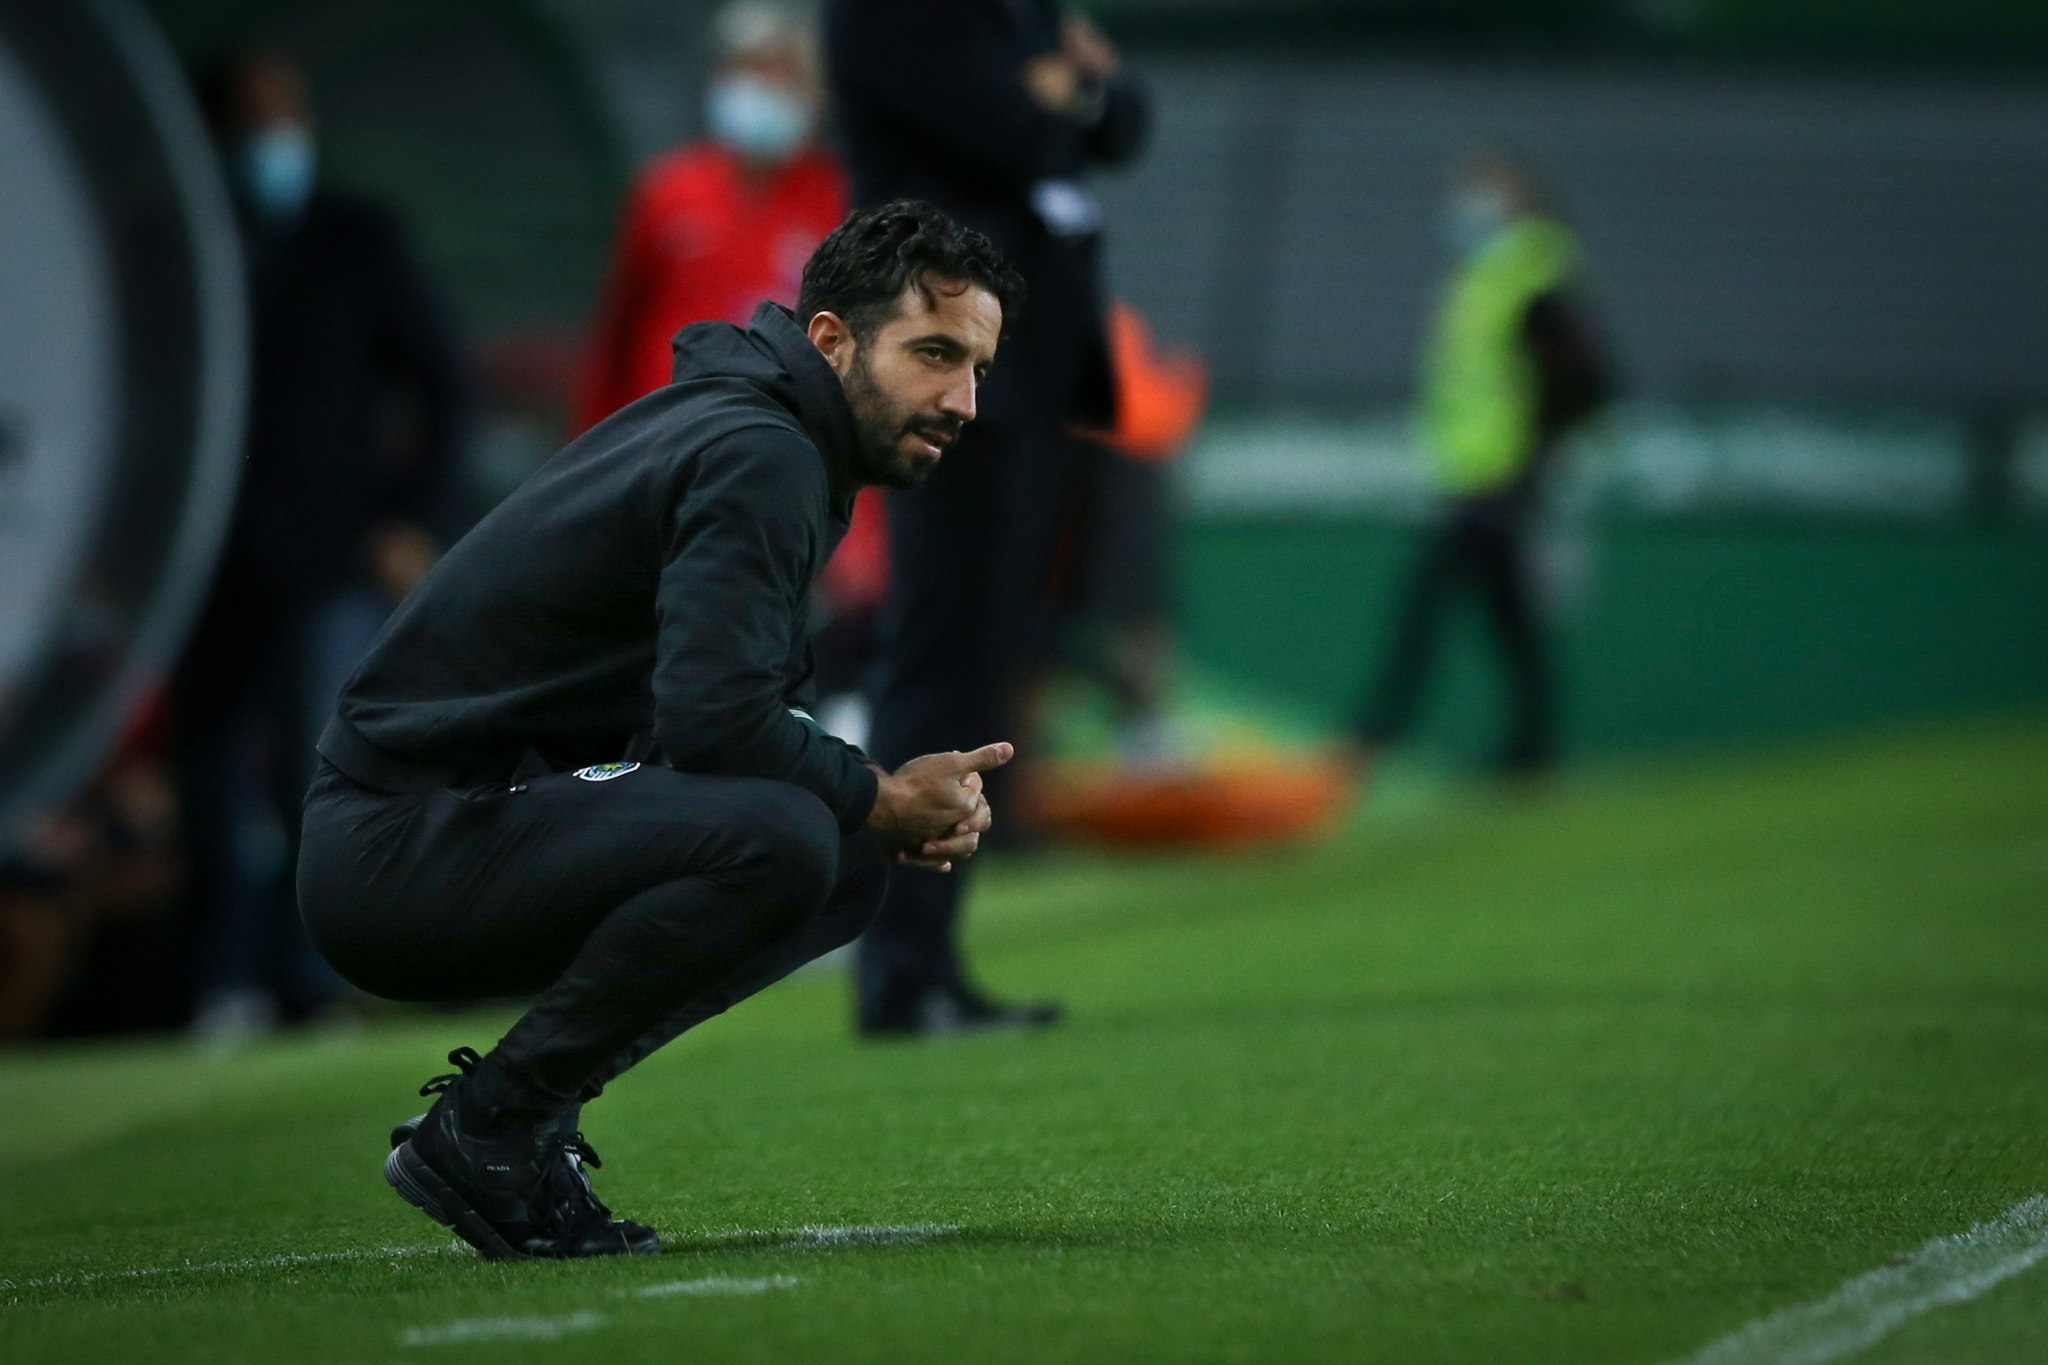 Ruben Amorim during Sporting's match against Maritimo on May 19, 2021.